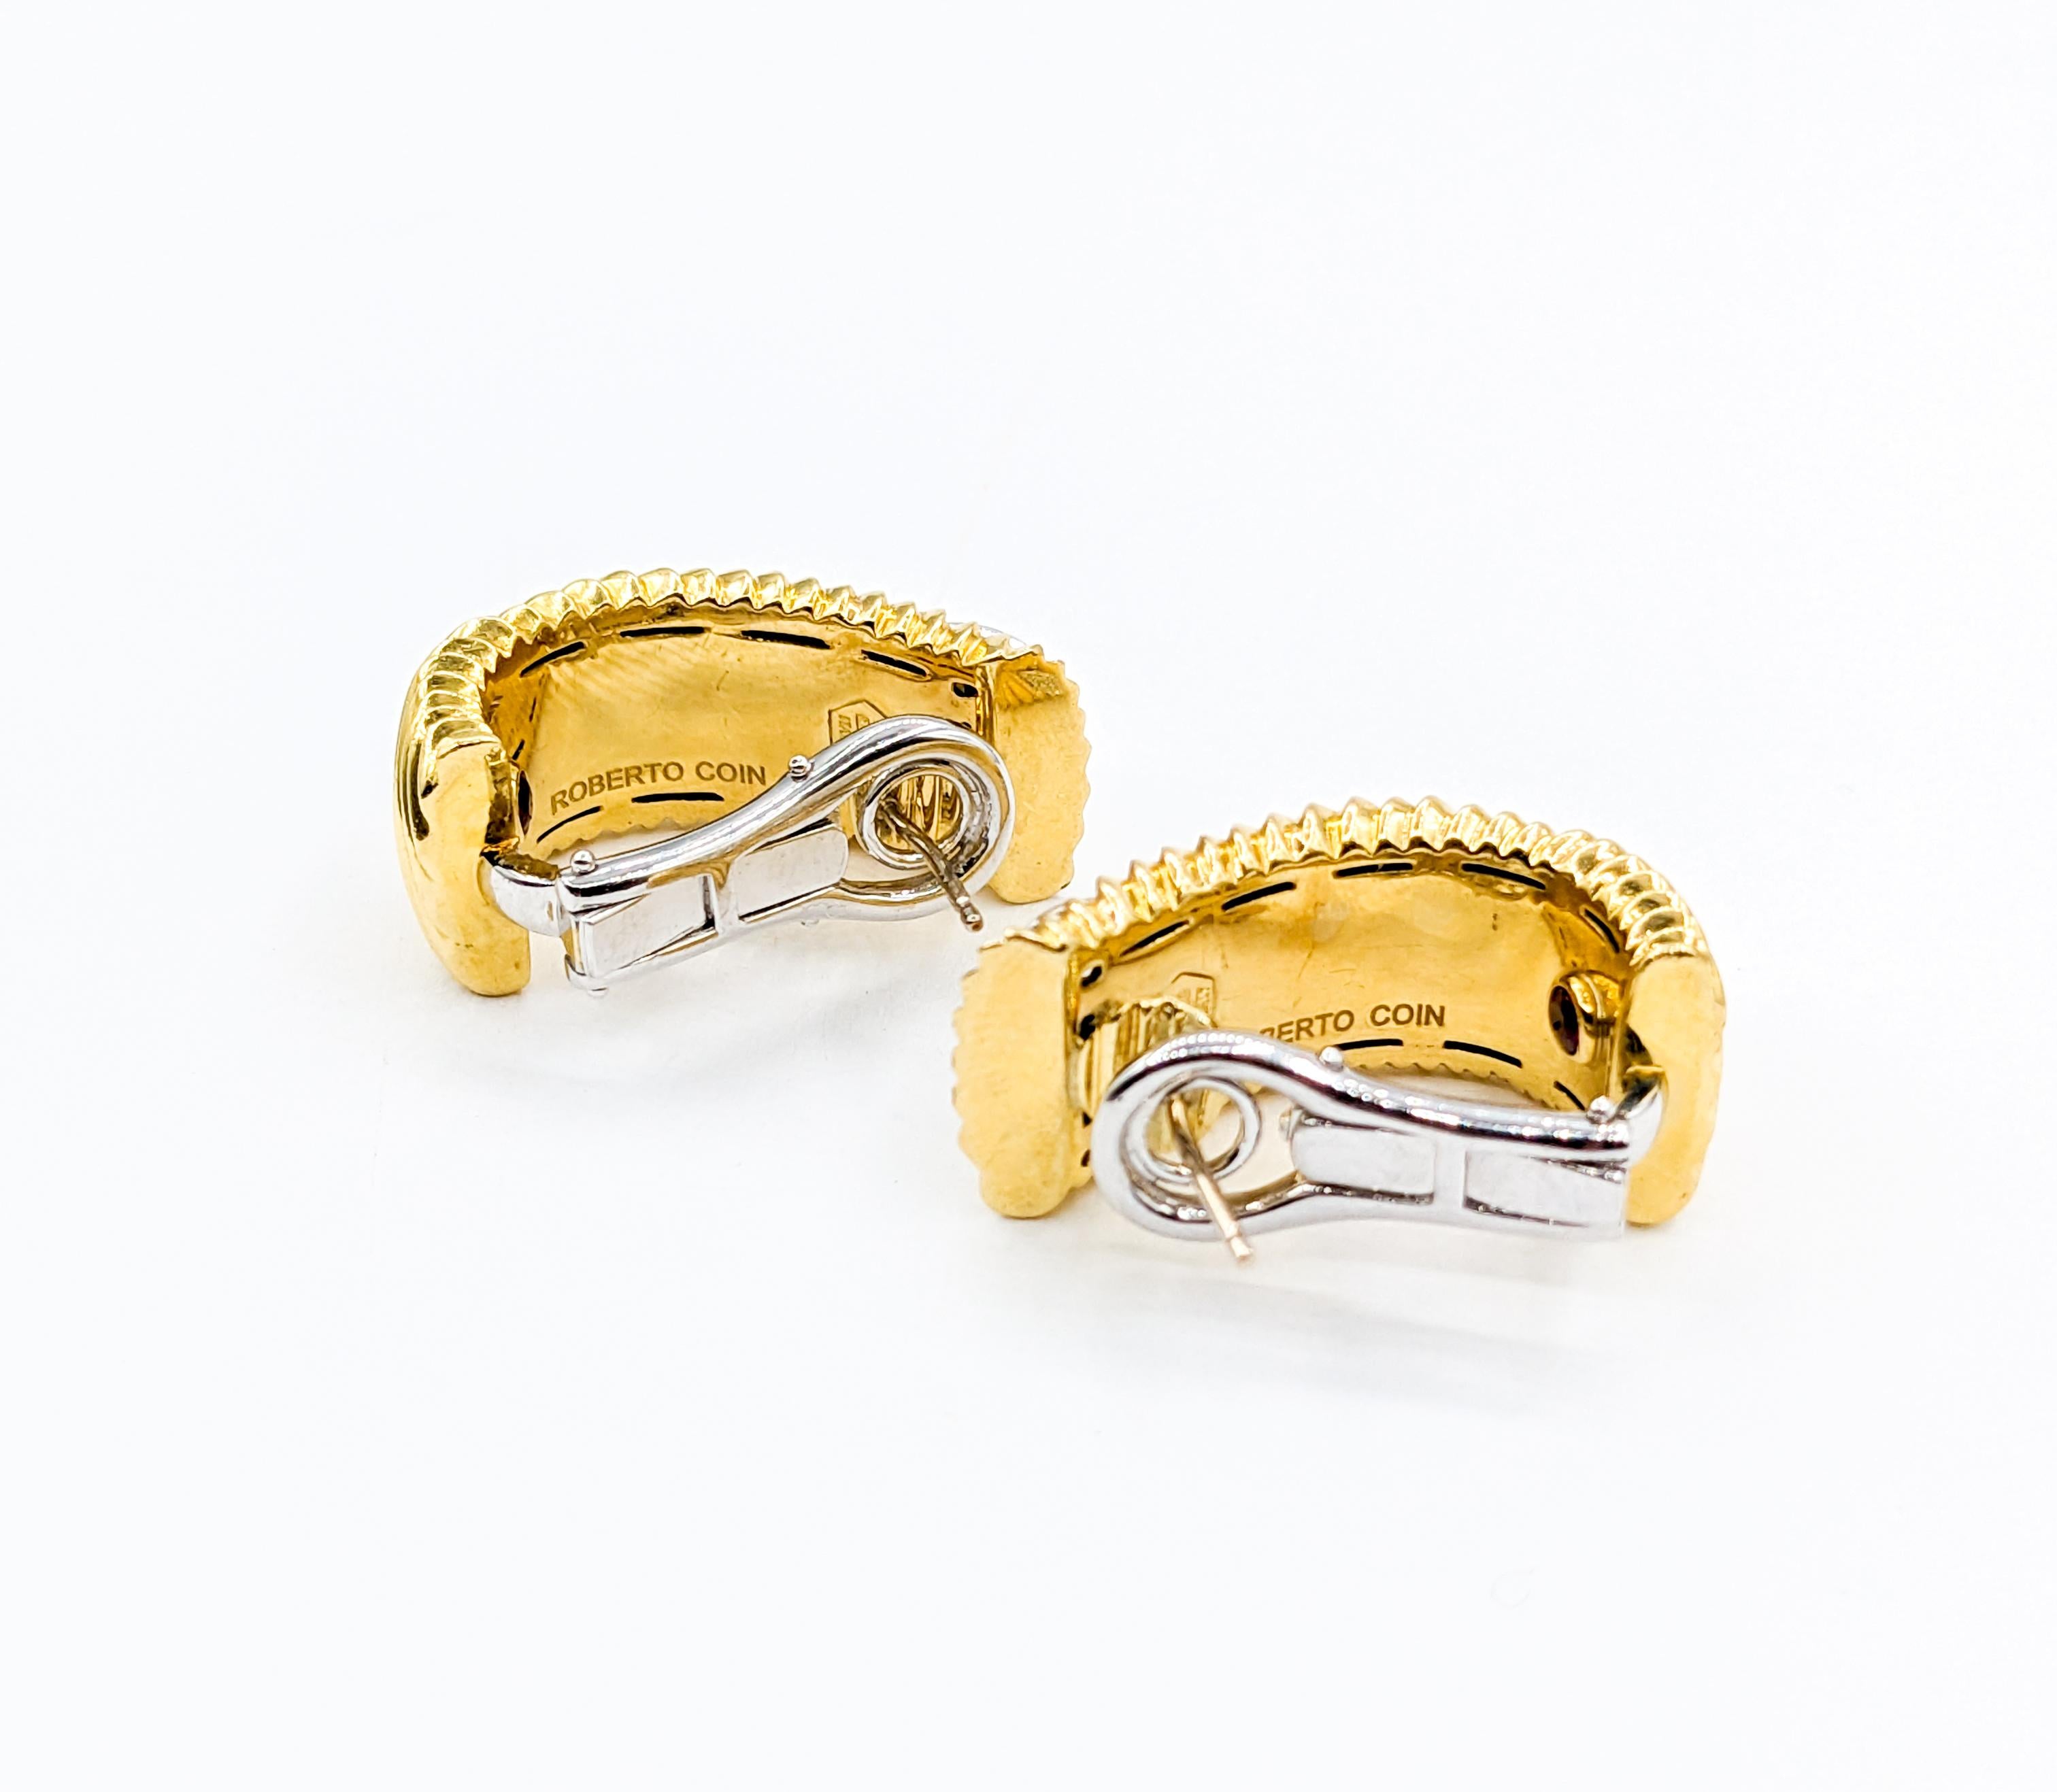 Roberto Coin 18k Diamond Omega Stud Earrings In Excellent Condition For Sale In Bloomington, MN